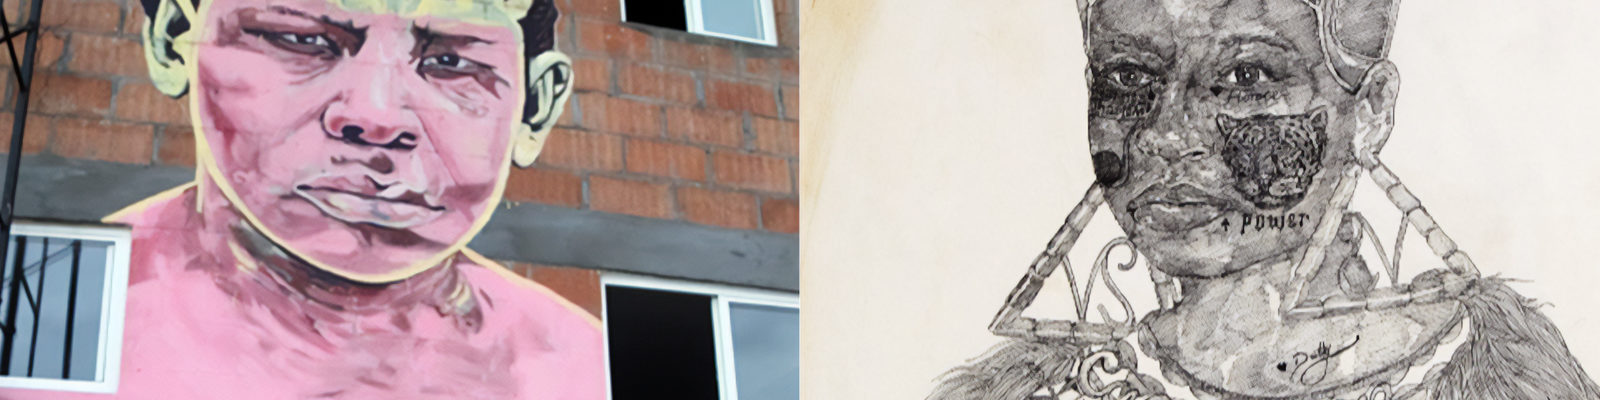 Collage of two artworks: at left, a mural of a boy with pink skin; at right, a portrait of a Black woman